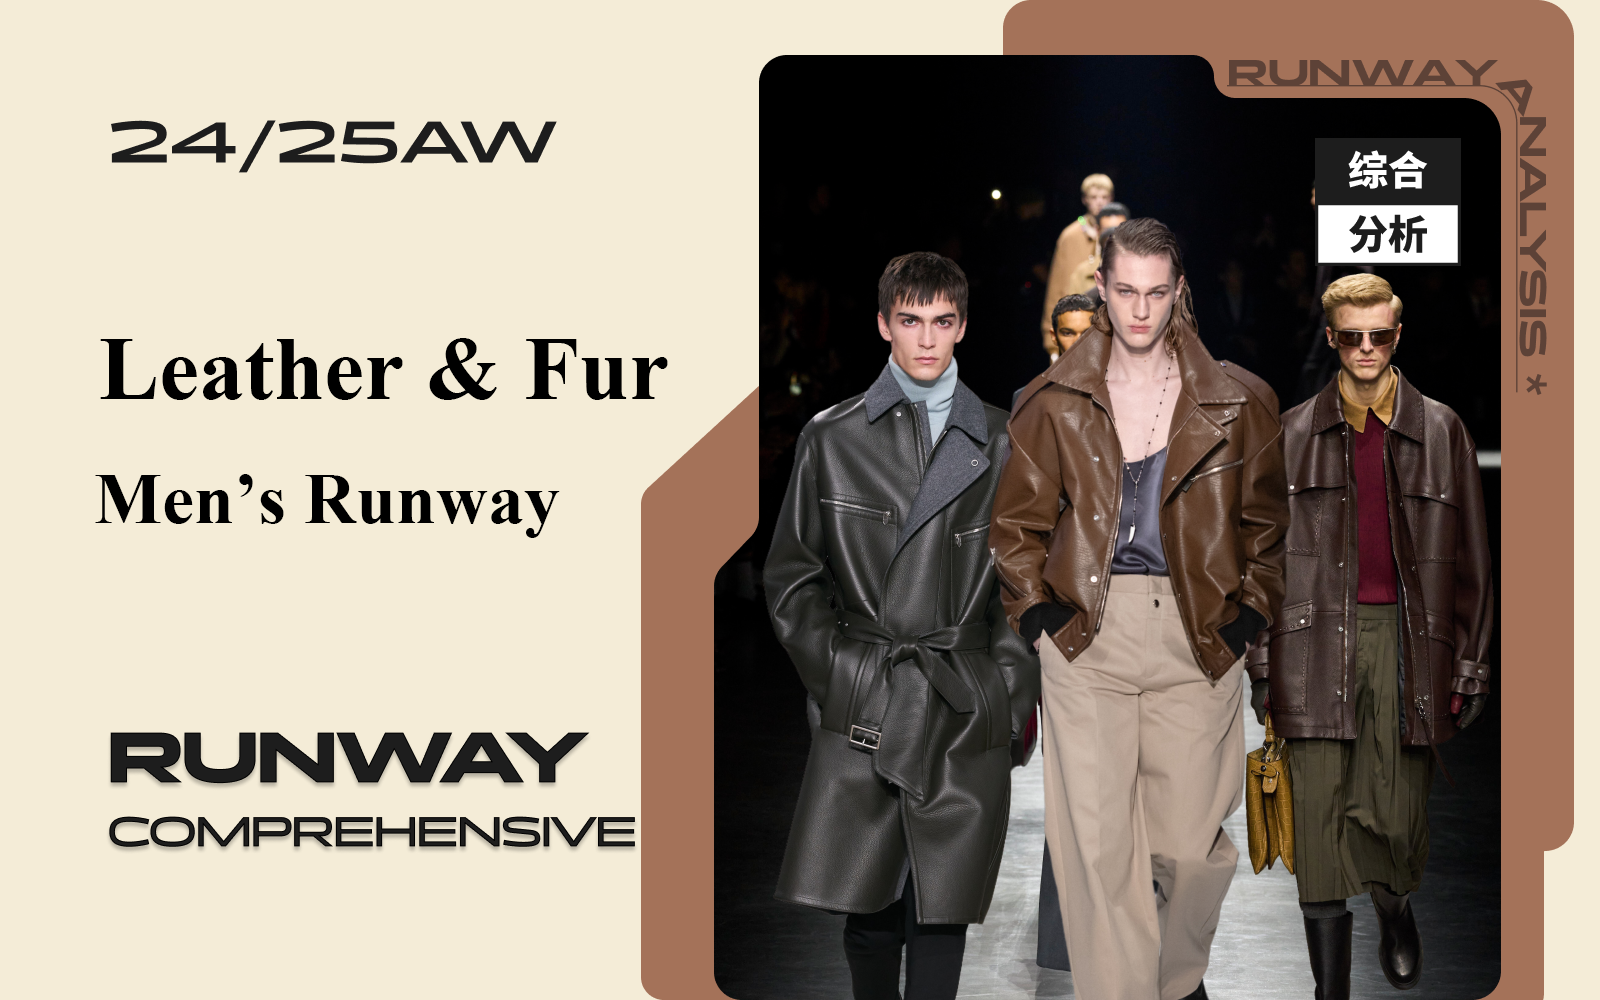 Leather & Fur -- The Comprehensive Analysis of Men's Runway